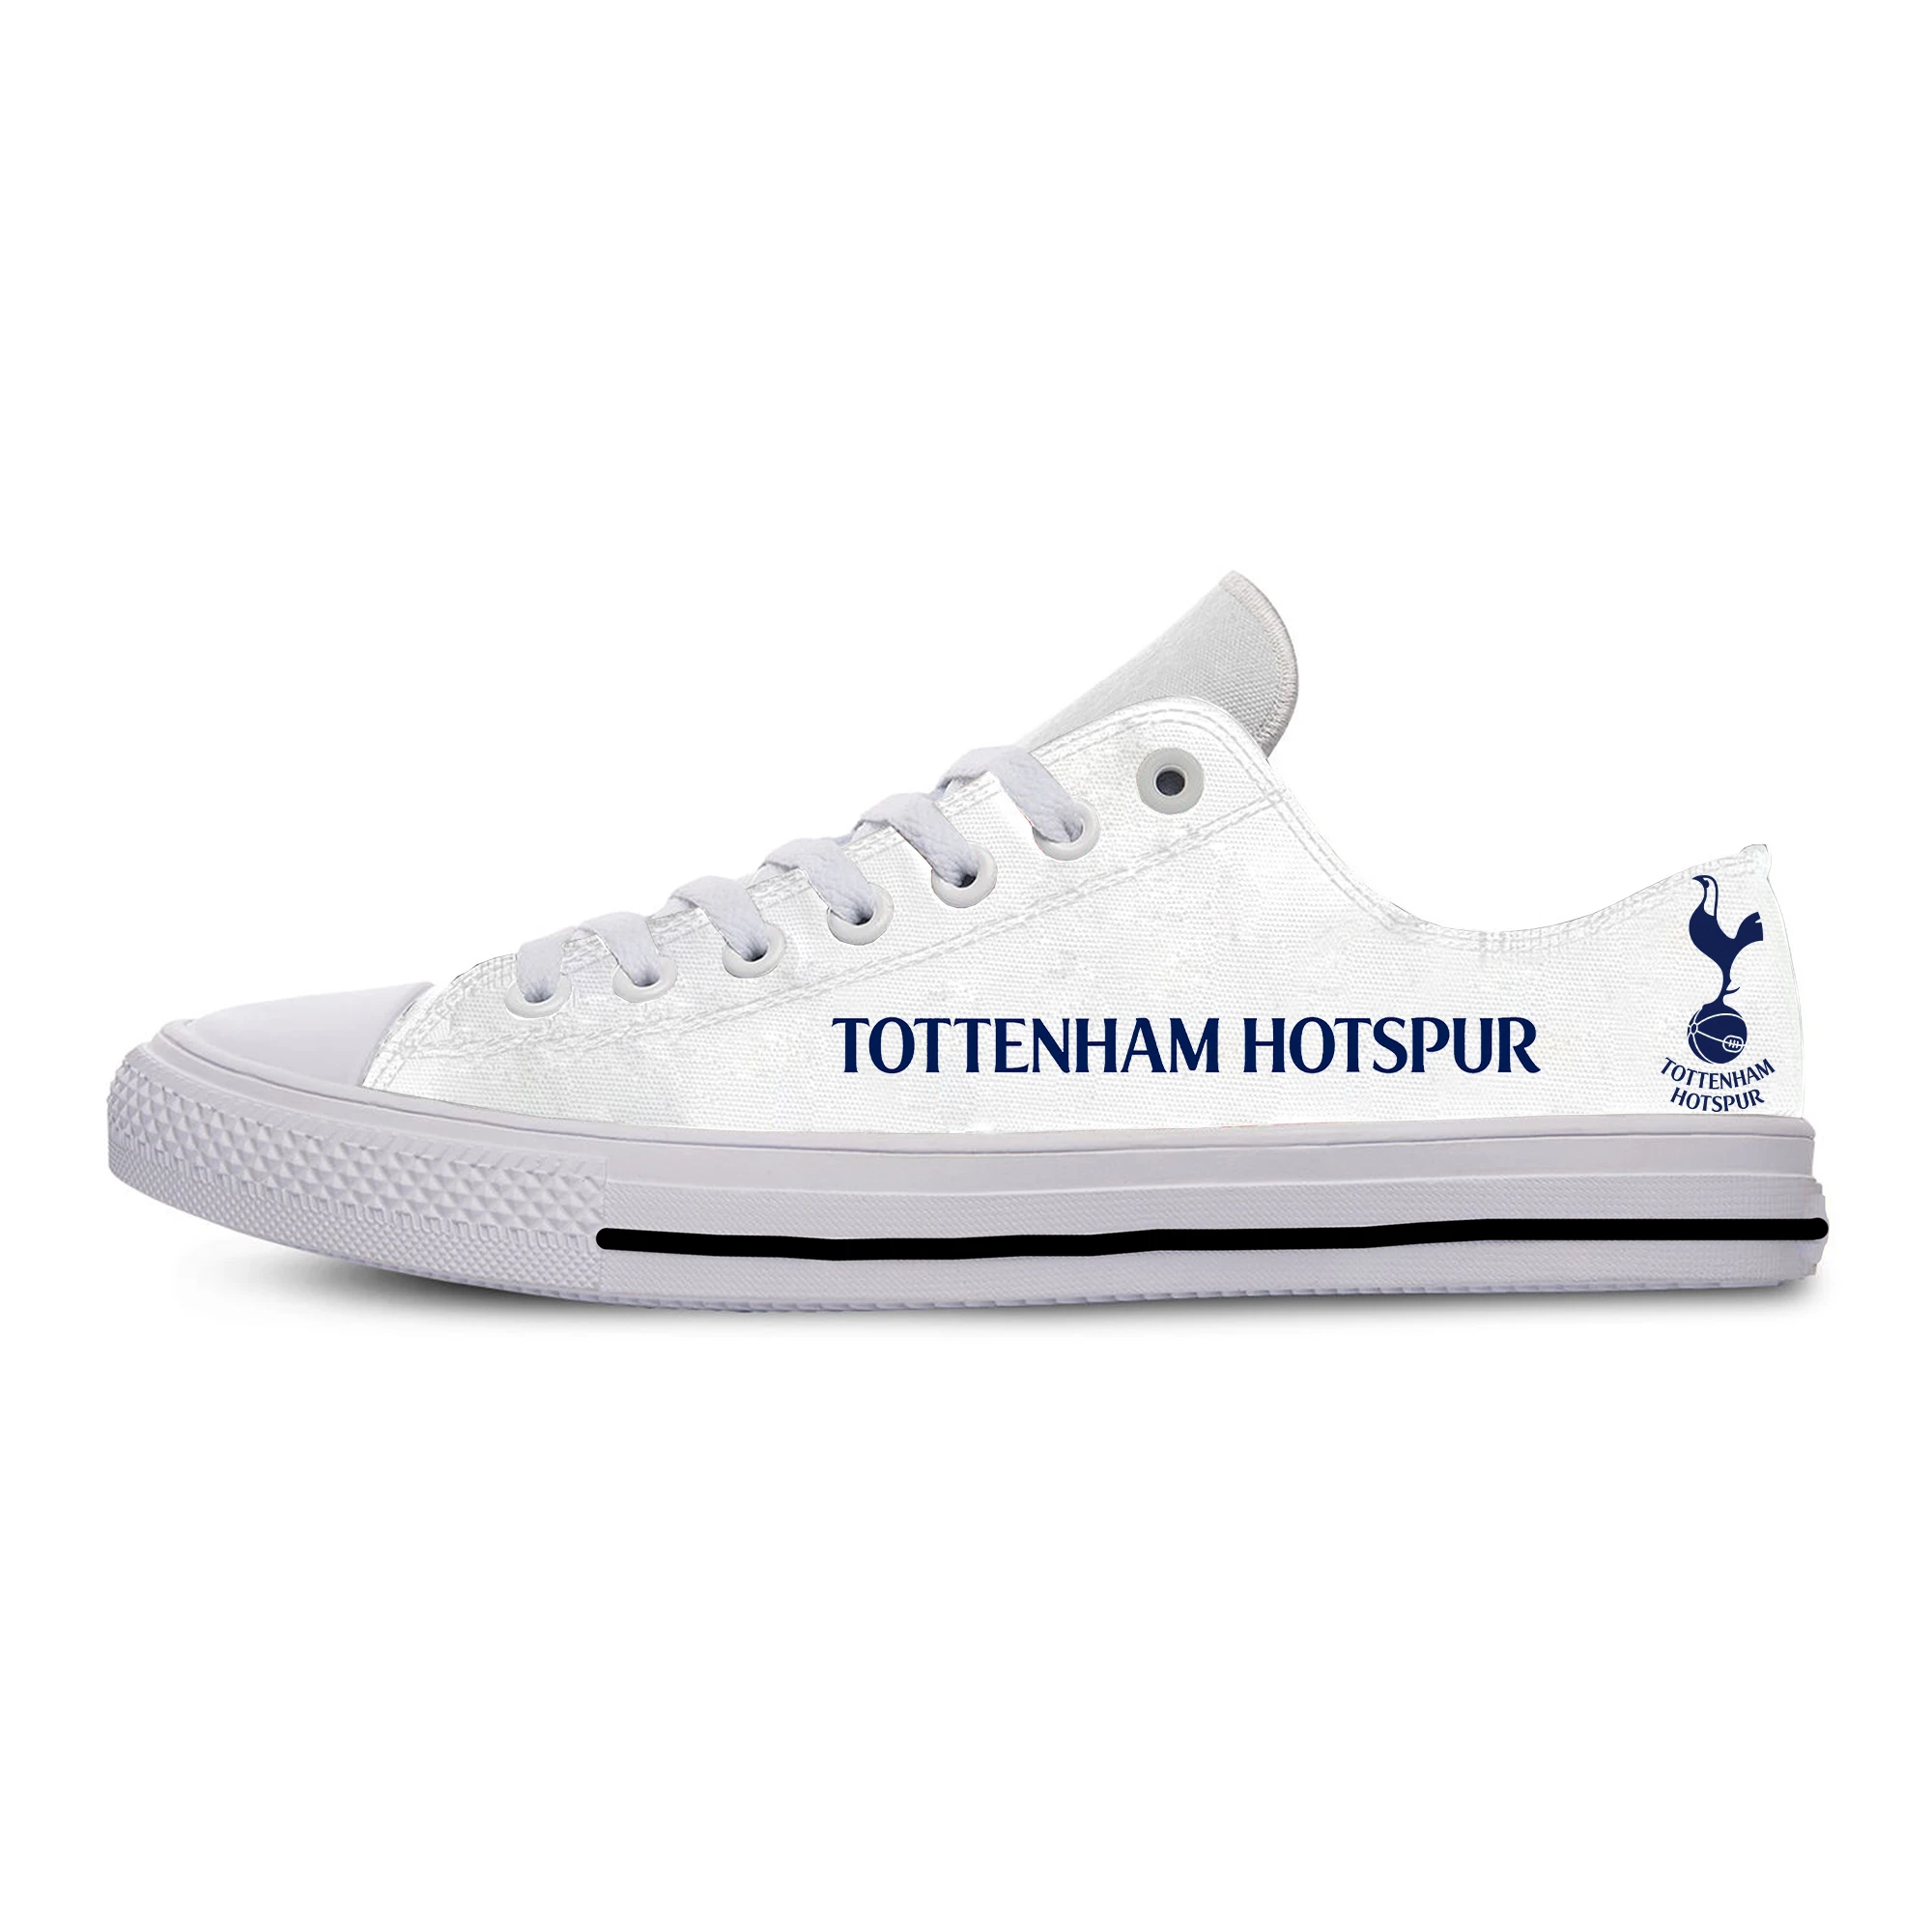 

Hotspur Classic Canvas Lightweight Fashion Men/Women Casual Shoes Tottenham Breathable Leisure Sneakers Football Scooer Fans